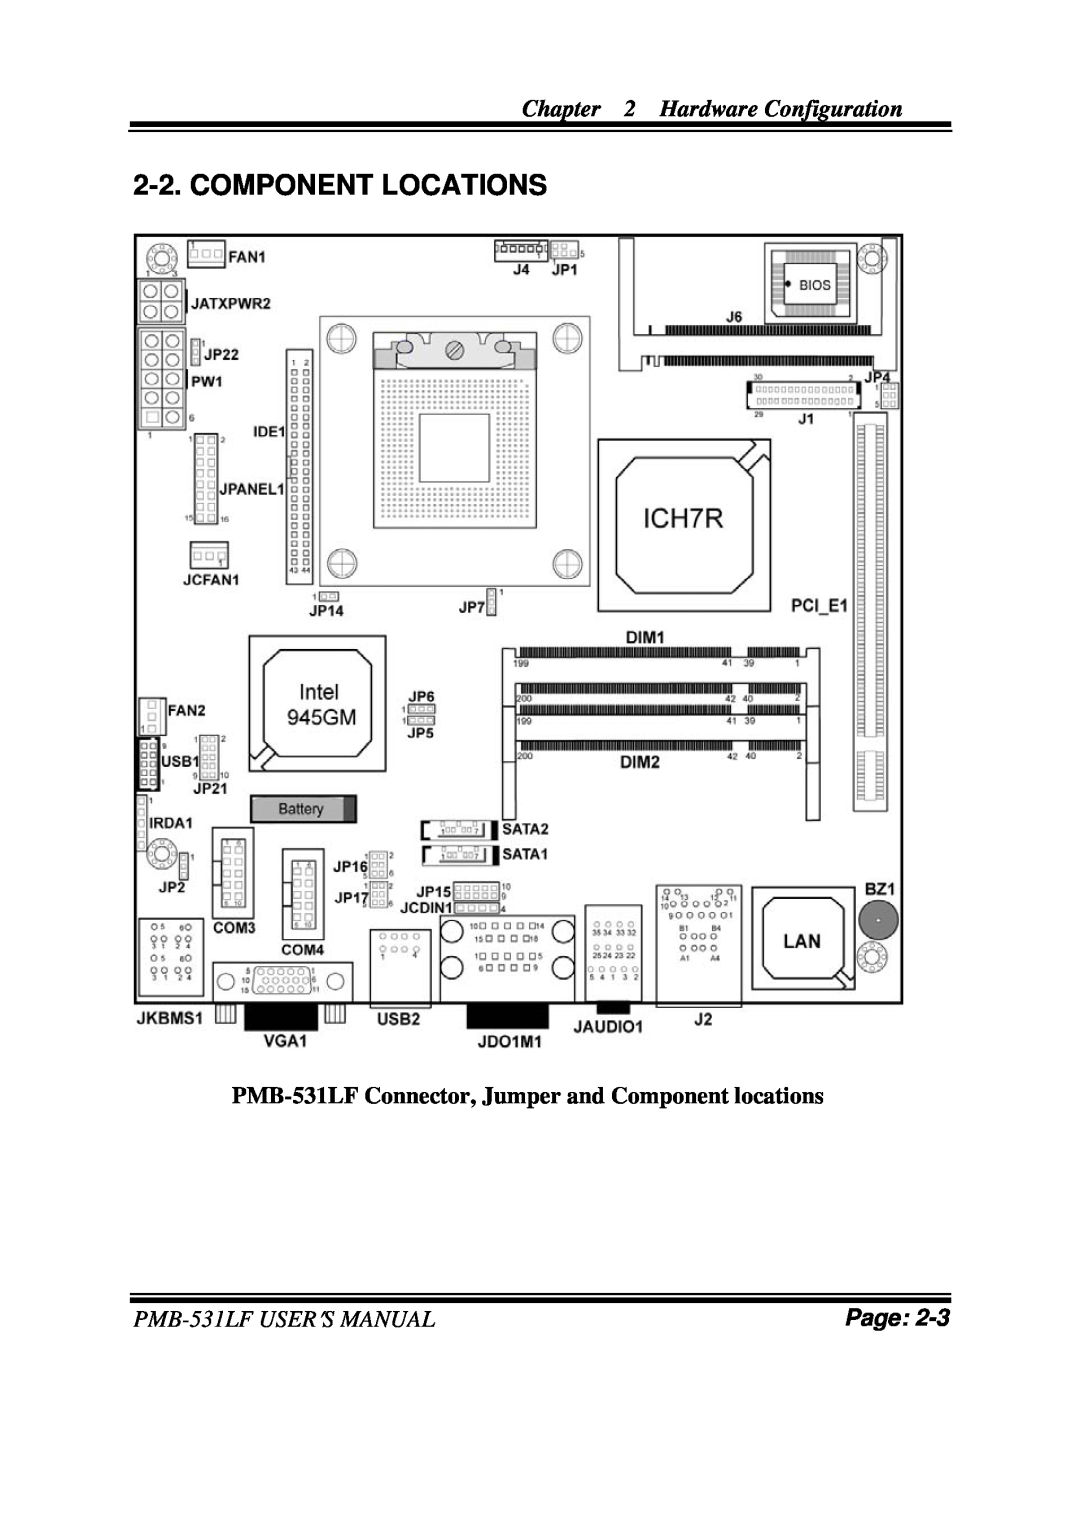 Intel user manual Component Locations, Hardware Configuration, PMB-531LFUSER′S MANUAL, Page 